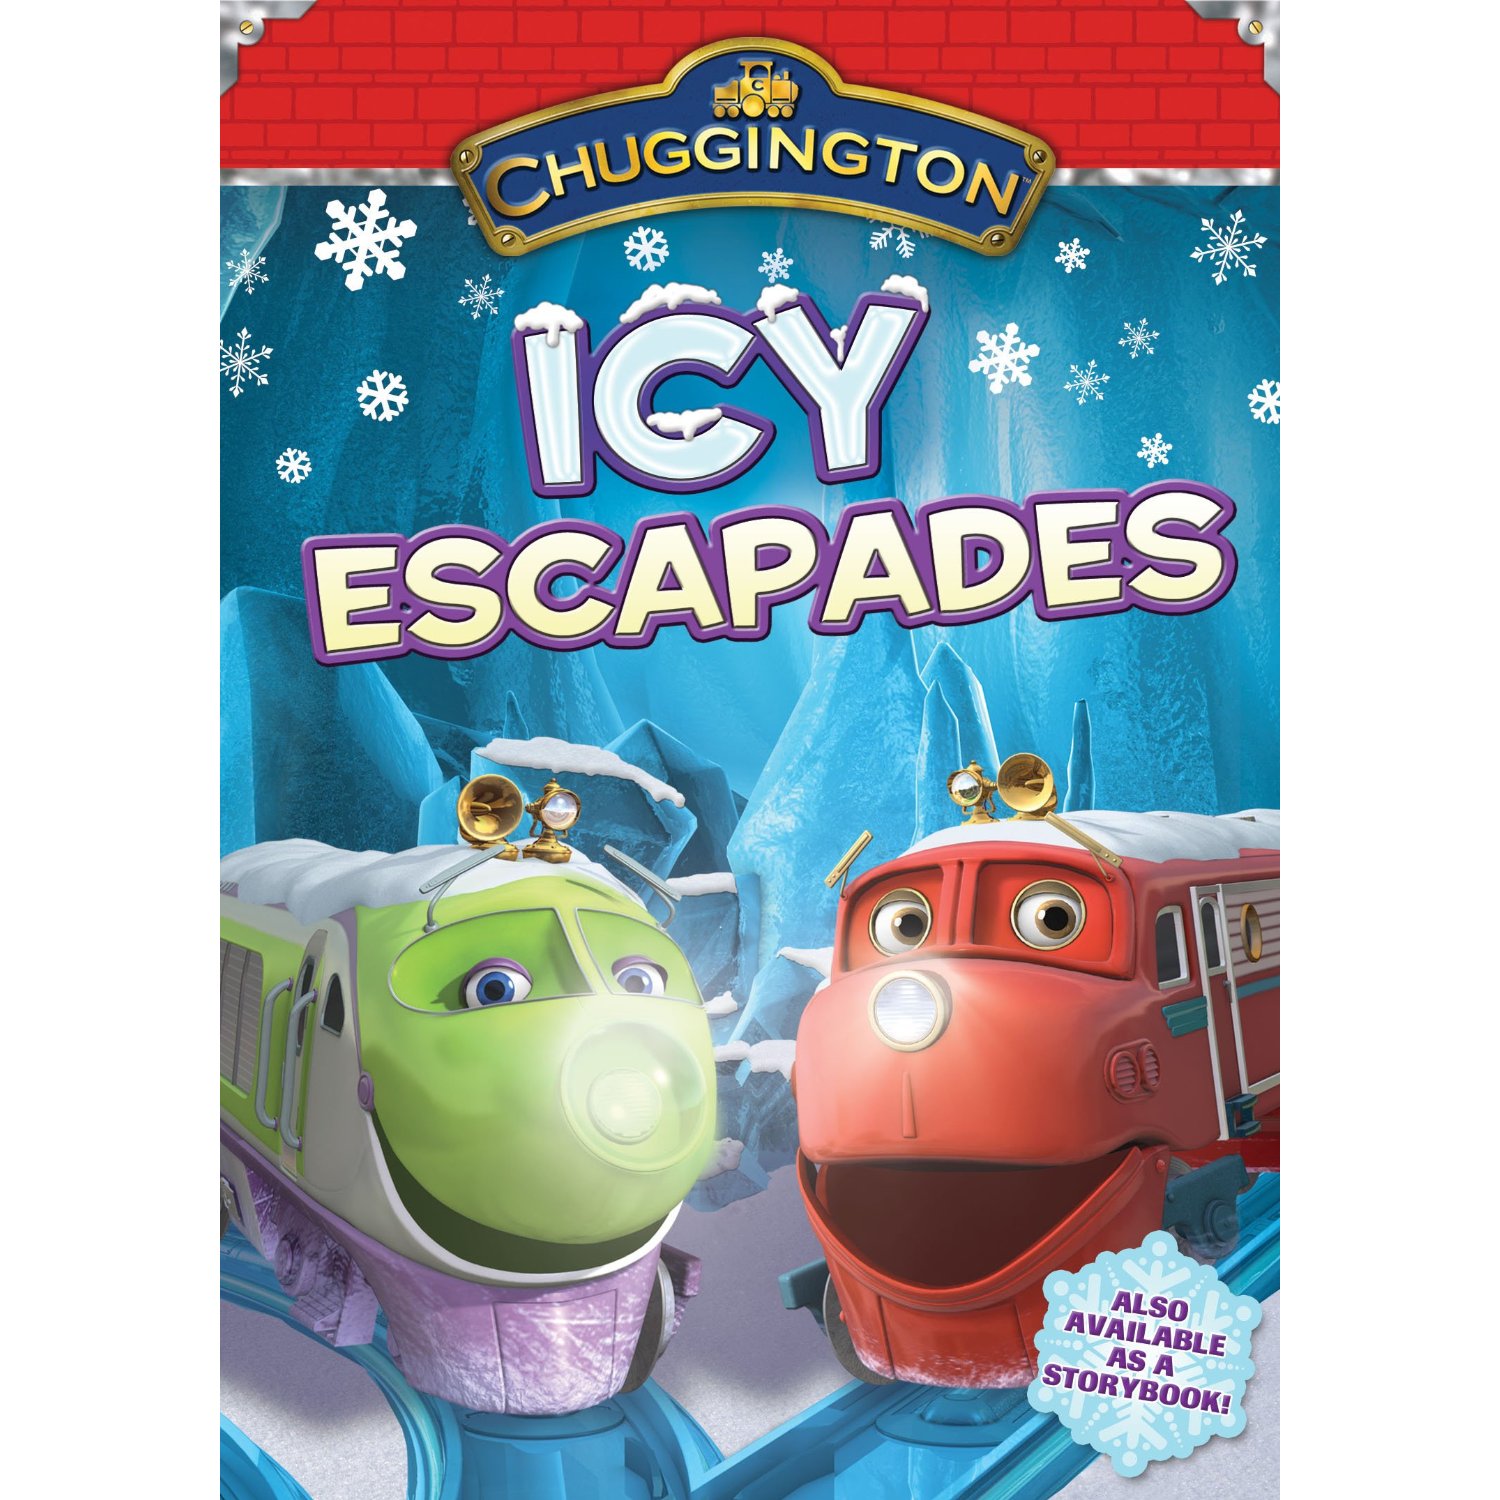 Chuggington & Tickety Toc DVDs as low as $2.99 at Target